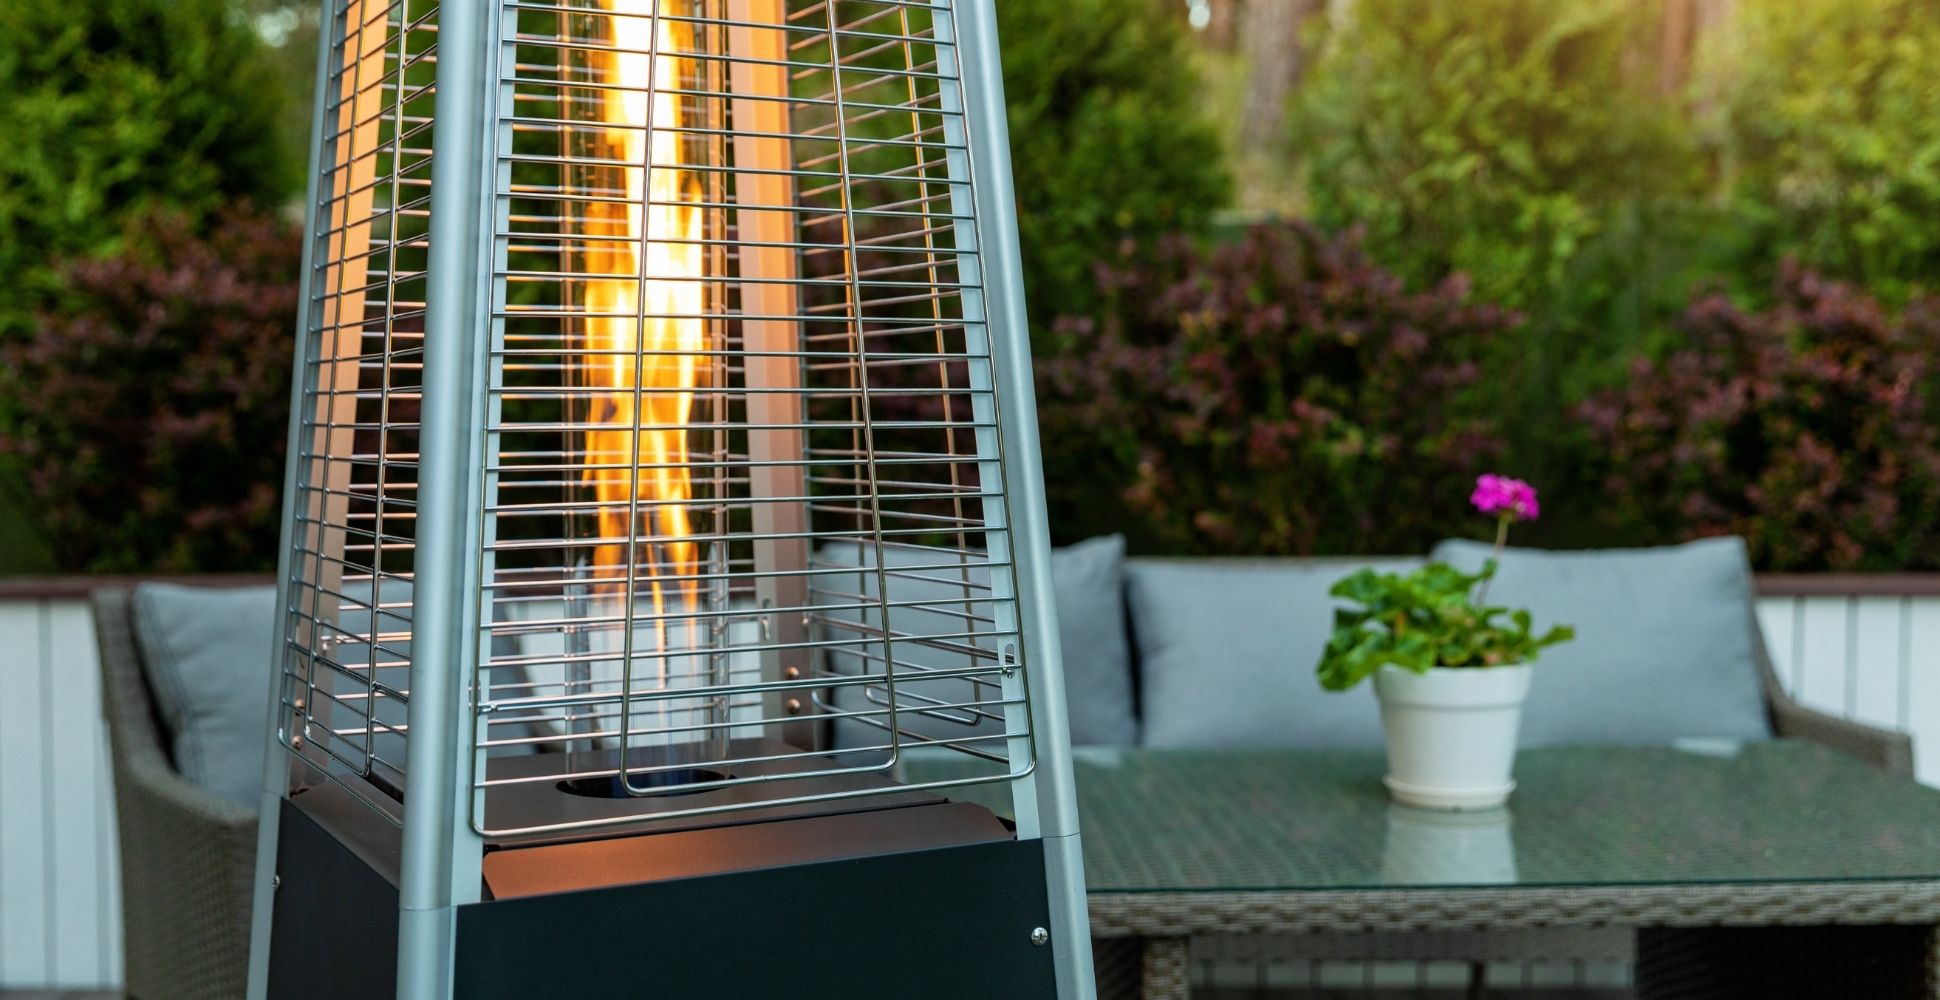 5 Best Gas Patio Heaters UK (2021 Review)